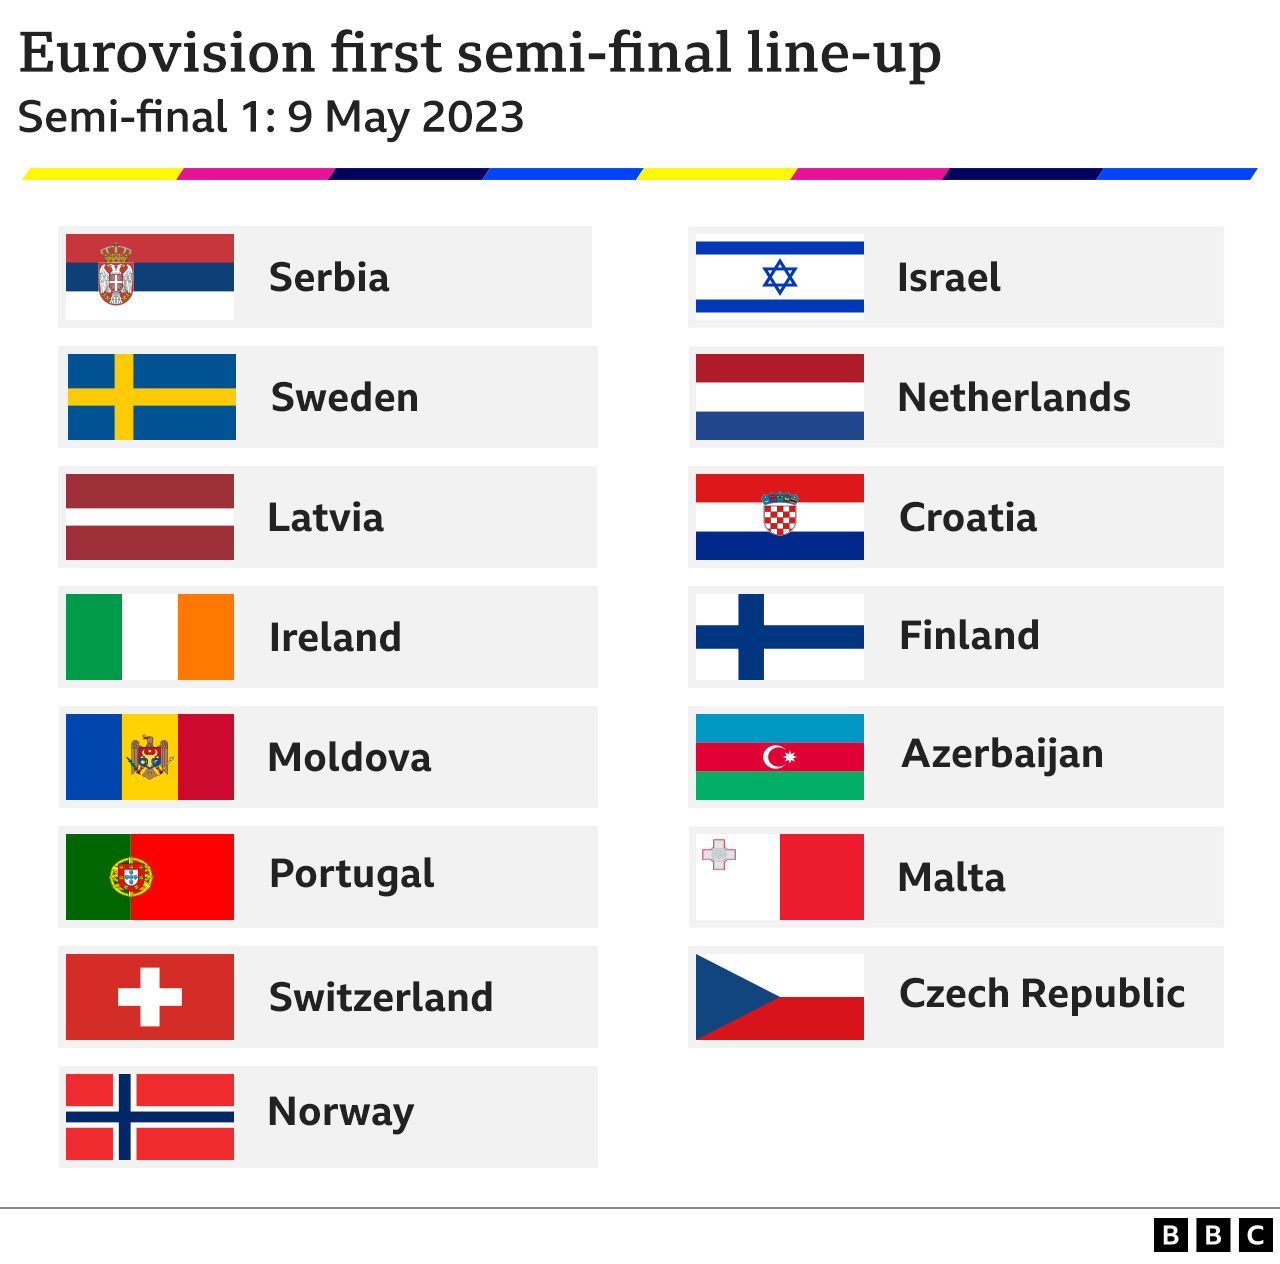 A table showing the line-up of countries taking part in semi-final one of Eurovision 2023, on 9 May 2023. The countries are: Azerbaijan, Croatia, Czech Republic, Finland, Ireland, Israel, Latvia, Malta, Moldova, Netherlands, Norway, Portugal, Serbia, Sweden and Switzerland.